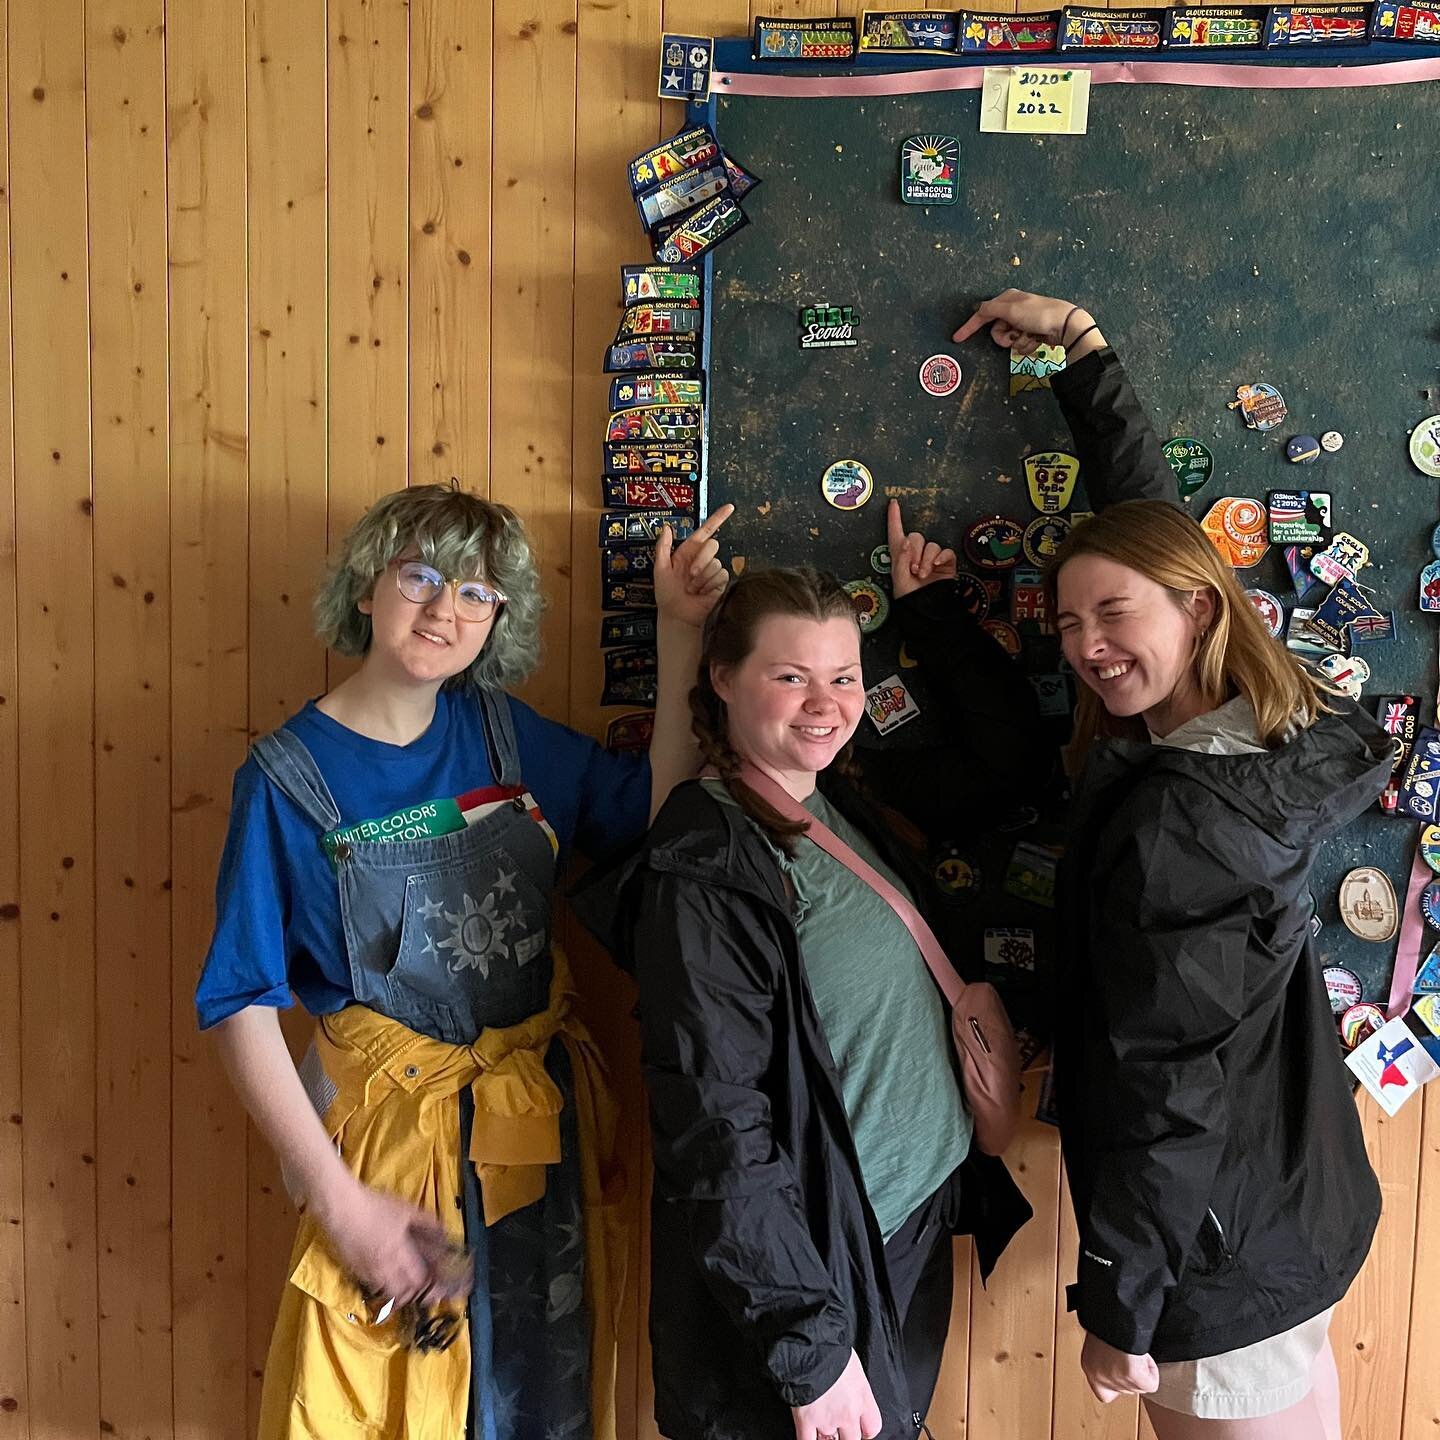 Since this project began as my Girl Scout Gold Award project, I wanted to share some pictures from my Girl Scout trip to Europe which we saved for for eight years to go on! We had so much fun and even got to visit the Girl Scout Chalet in Switzerland